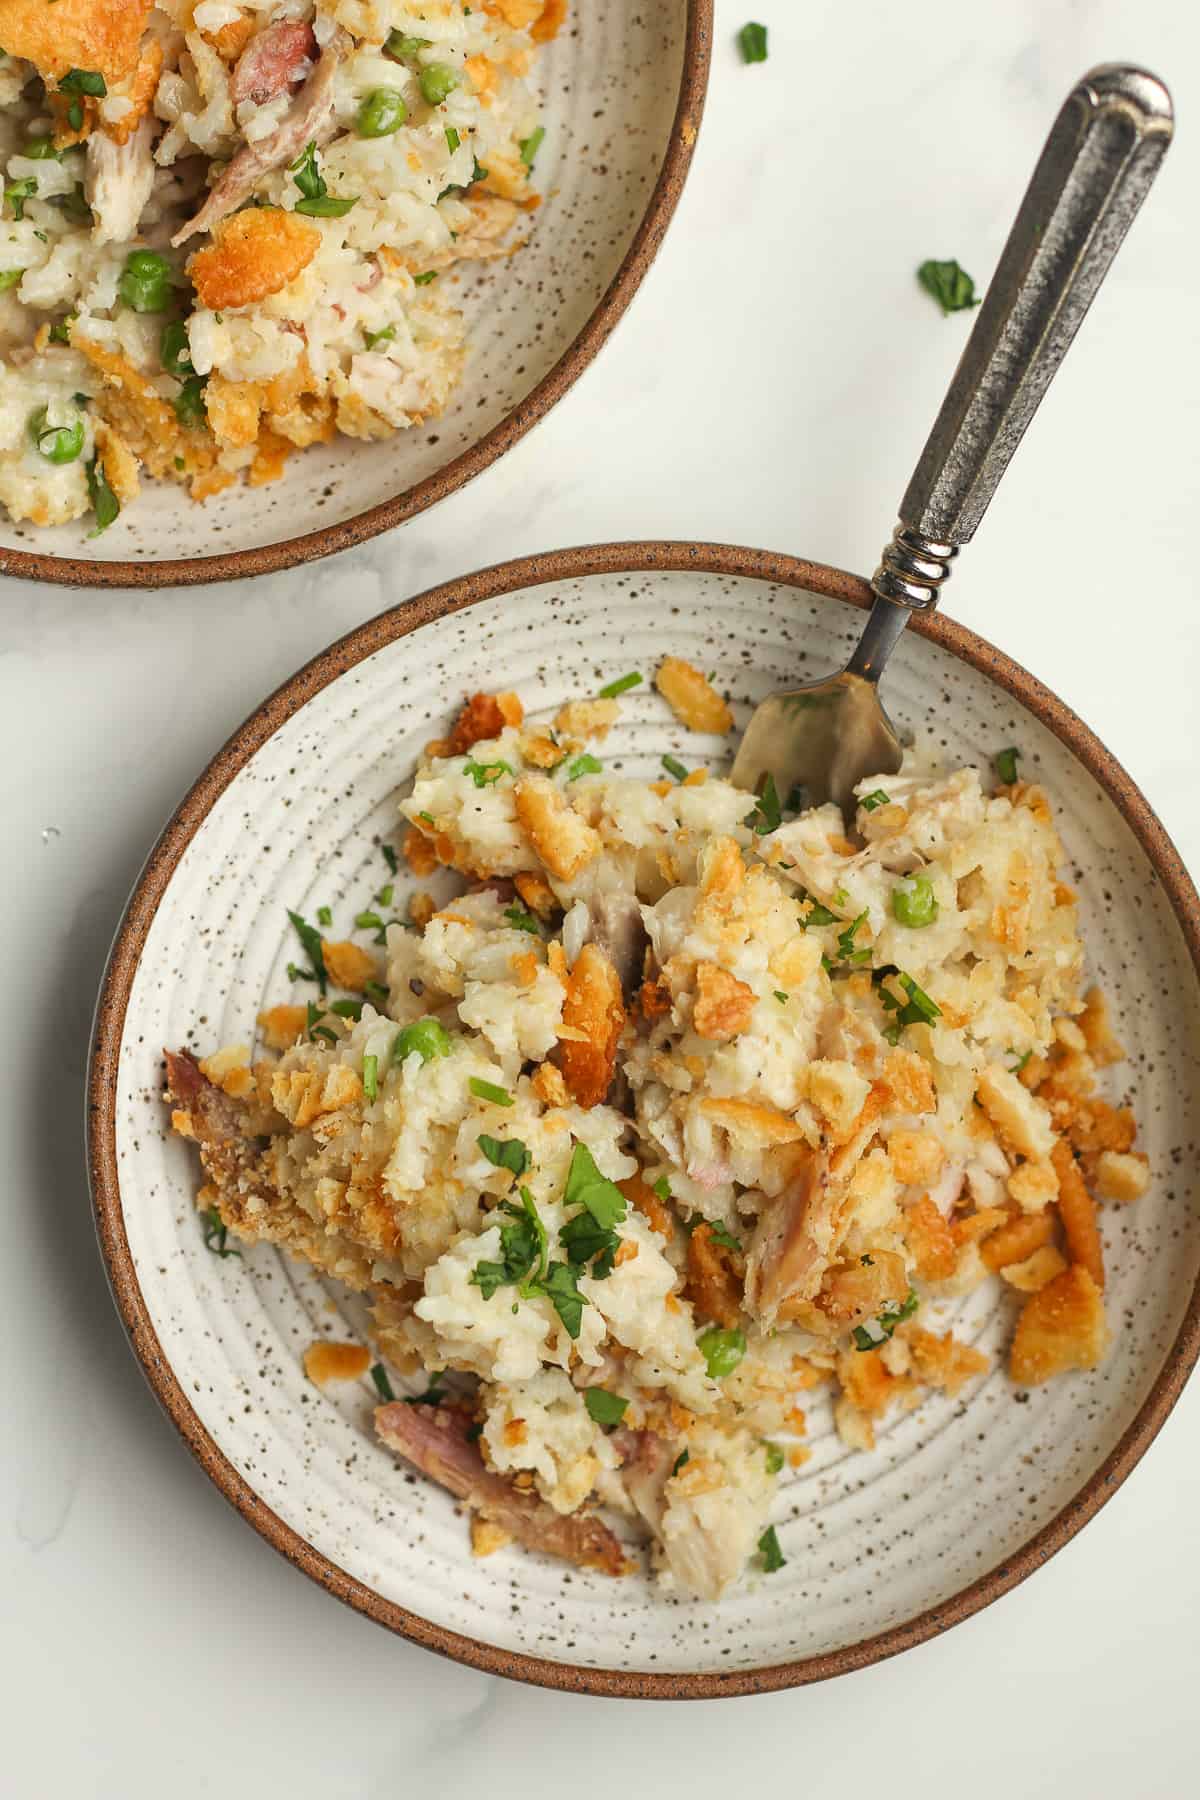 Two bowls of leftover turkey casserole with forks.